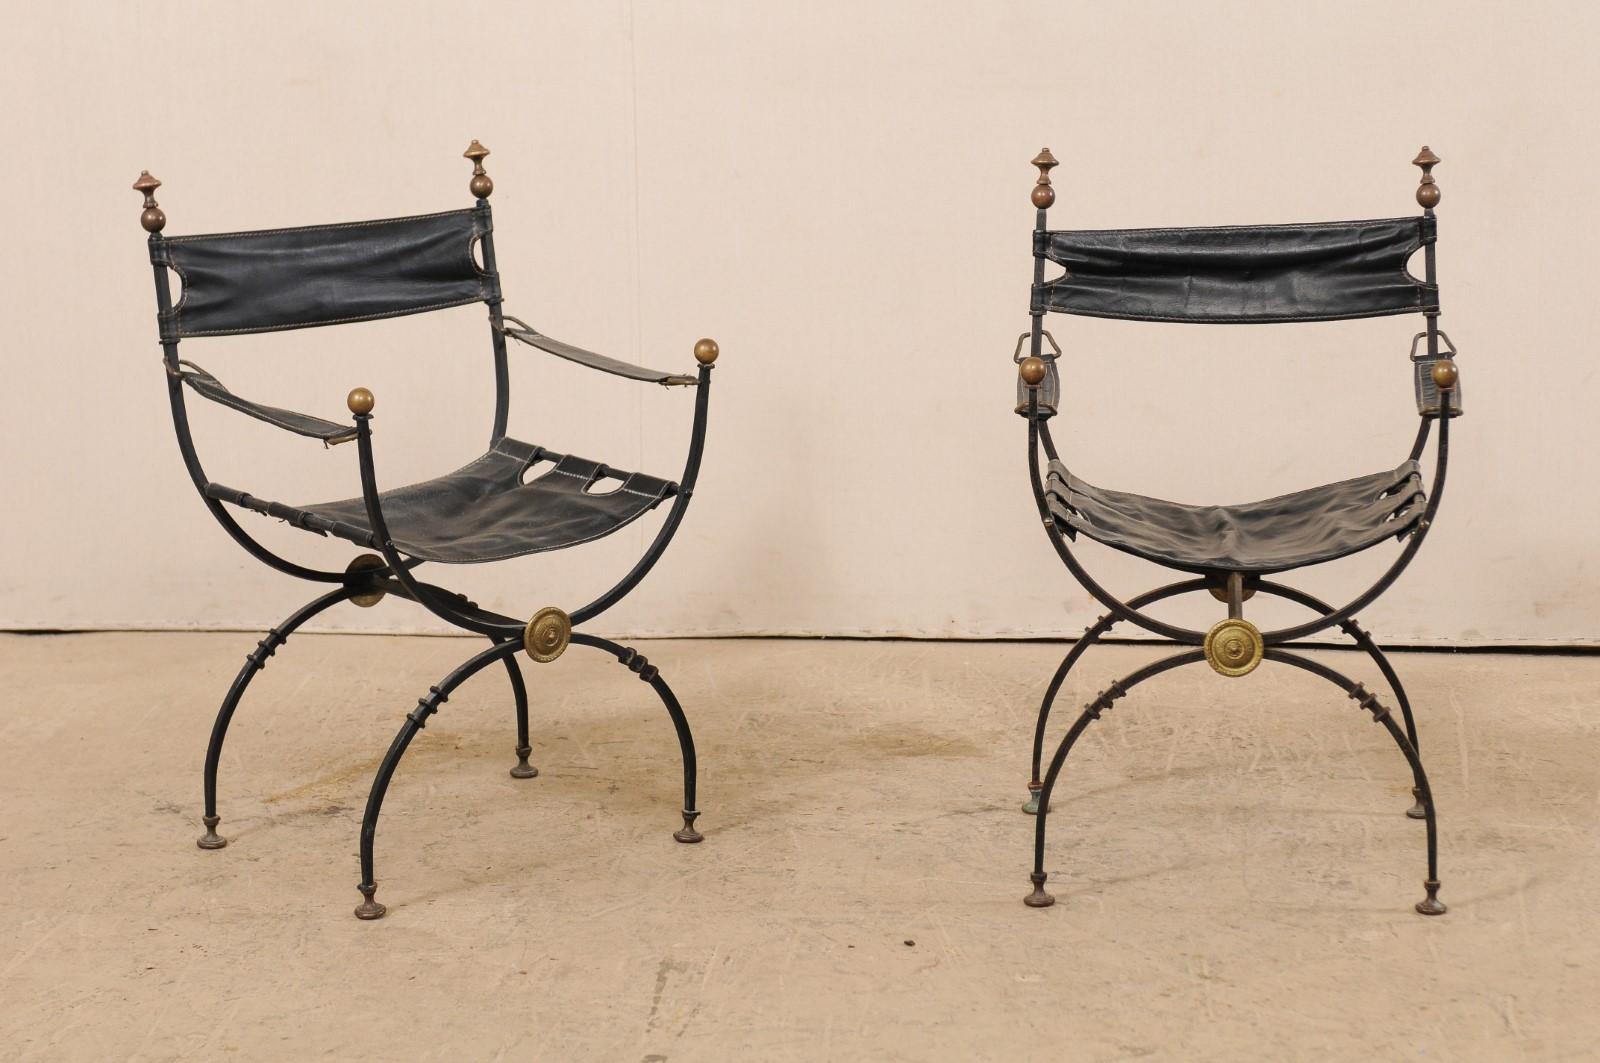 A pair of Italian curule savonarola chairs with black leather from the early 20th century. This pair of antique Italian curule chairs, also commonly called savonarola, which are defined by their signature semi-circular frames which connect where the